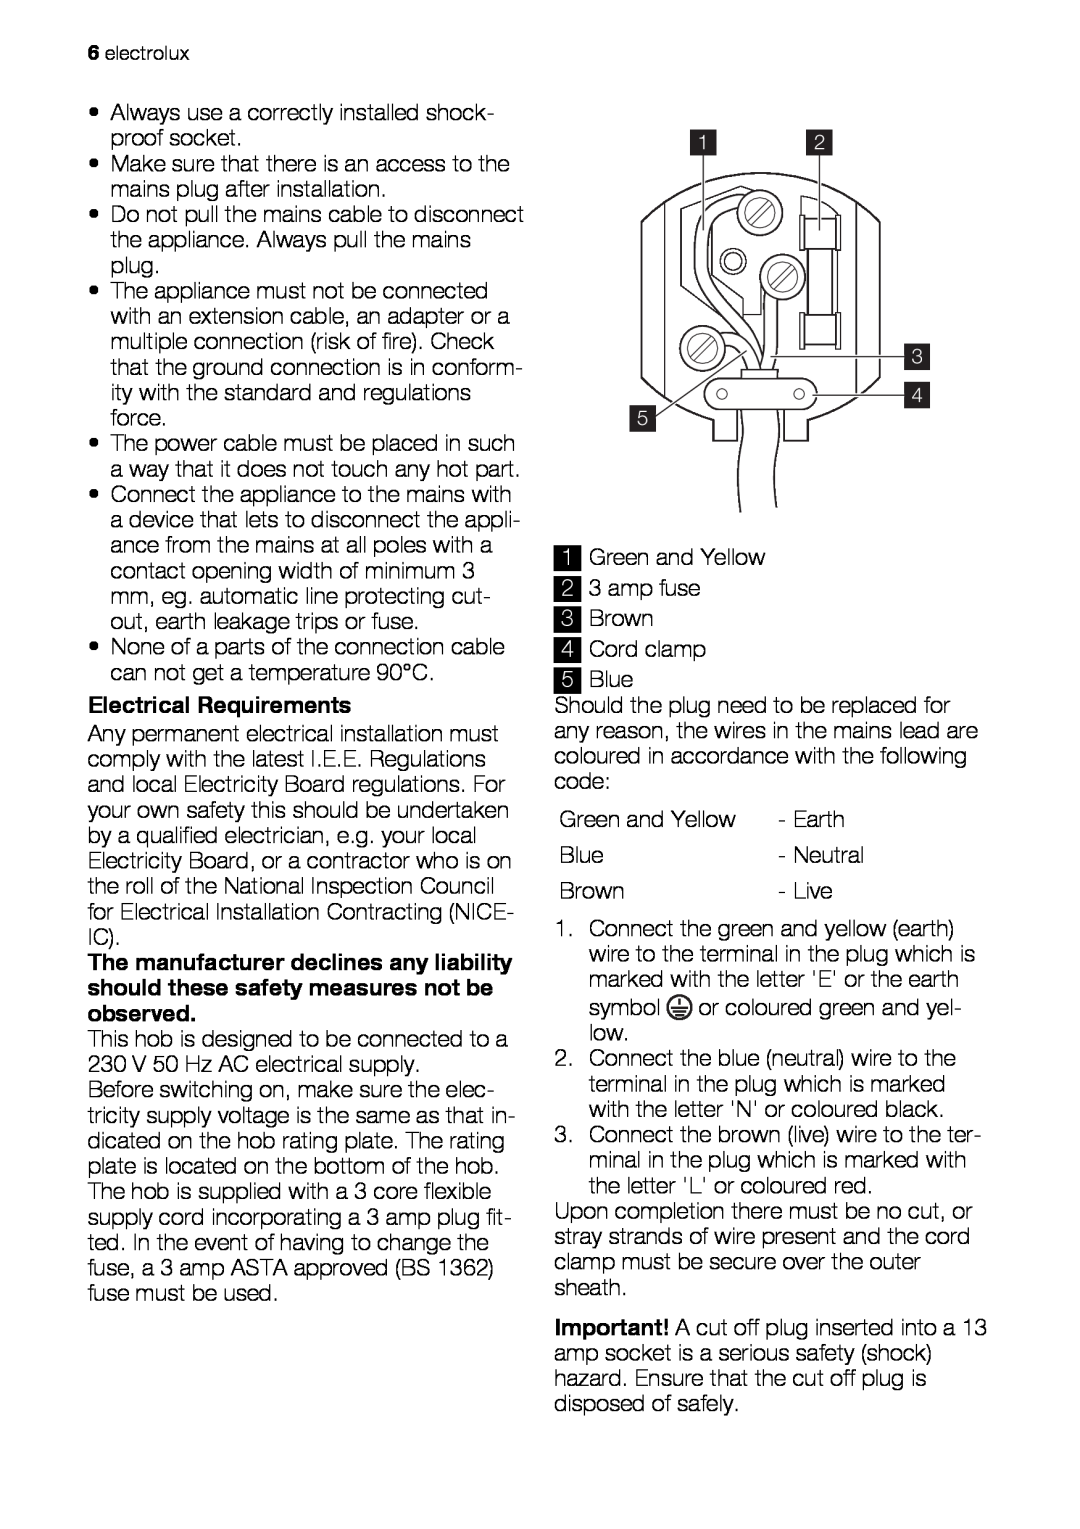 Electrolux EHG60412 user manual Electrical Requirements 